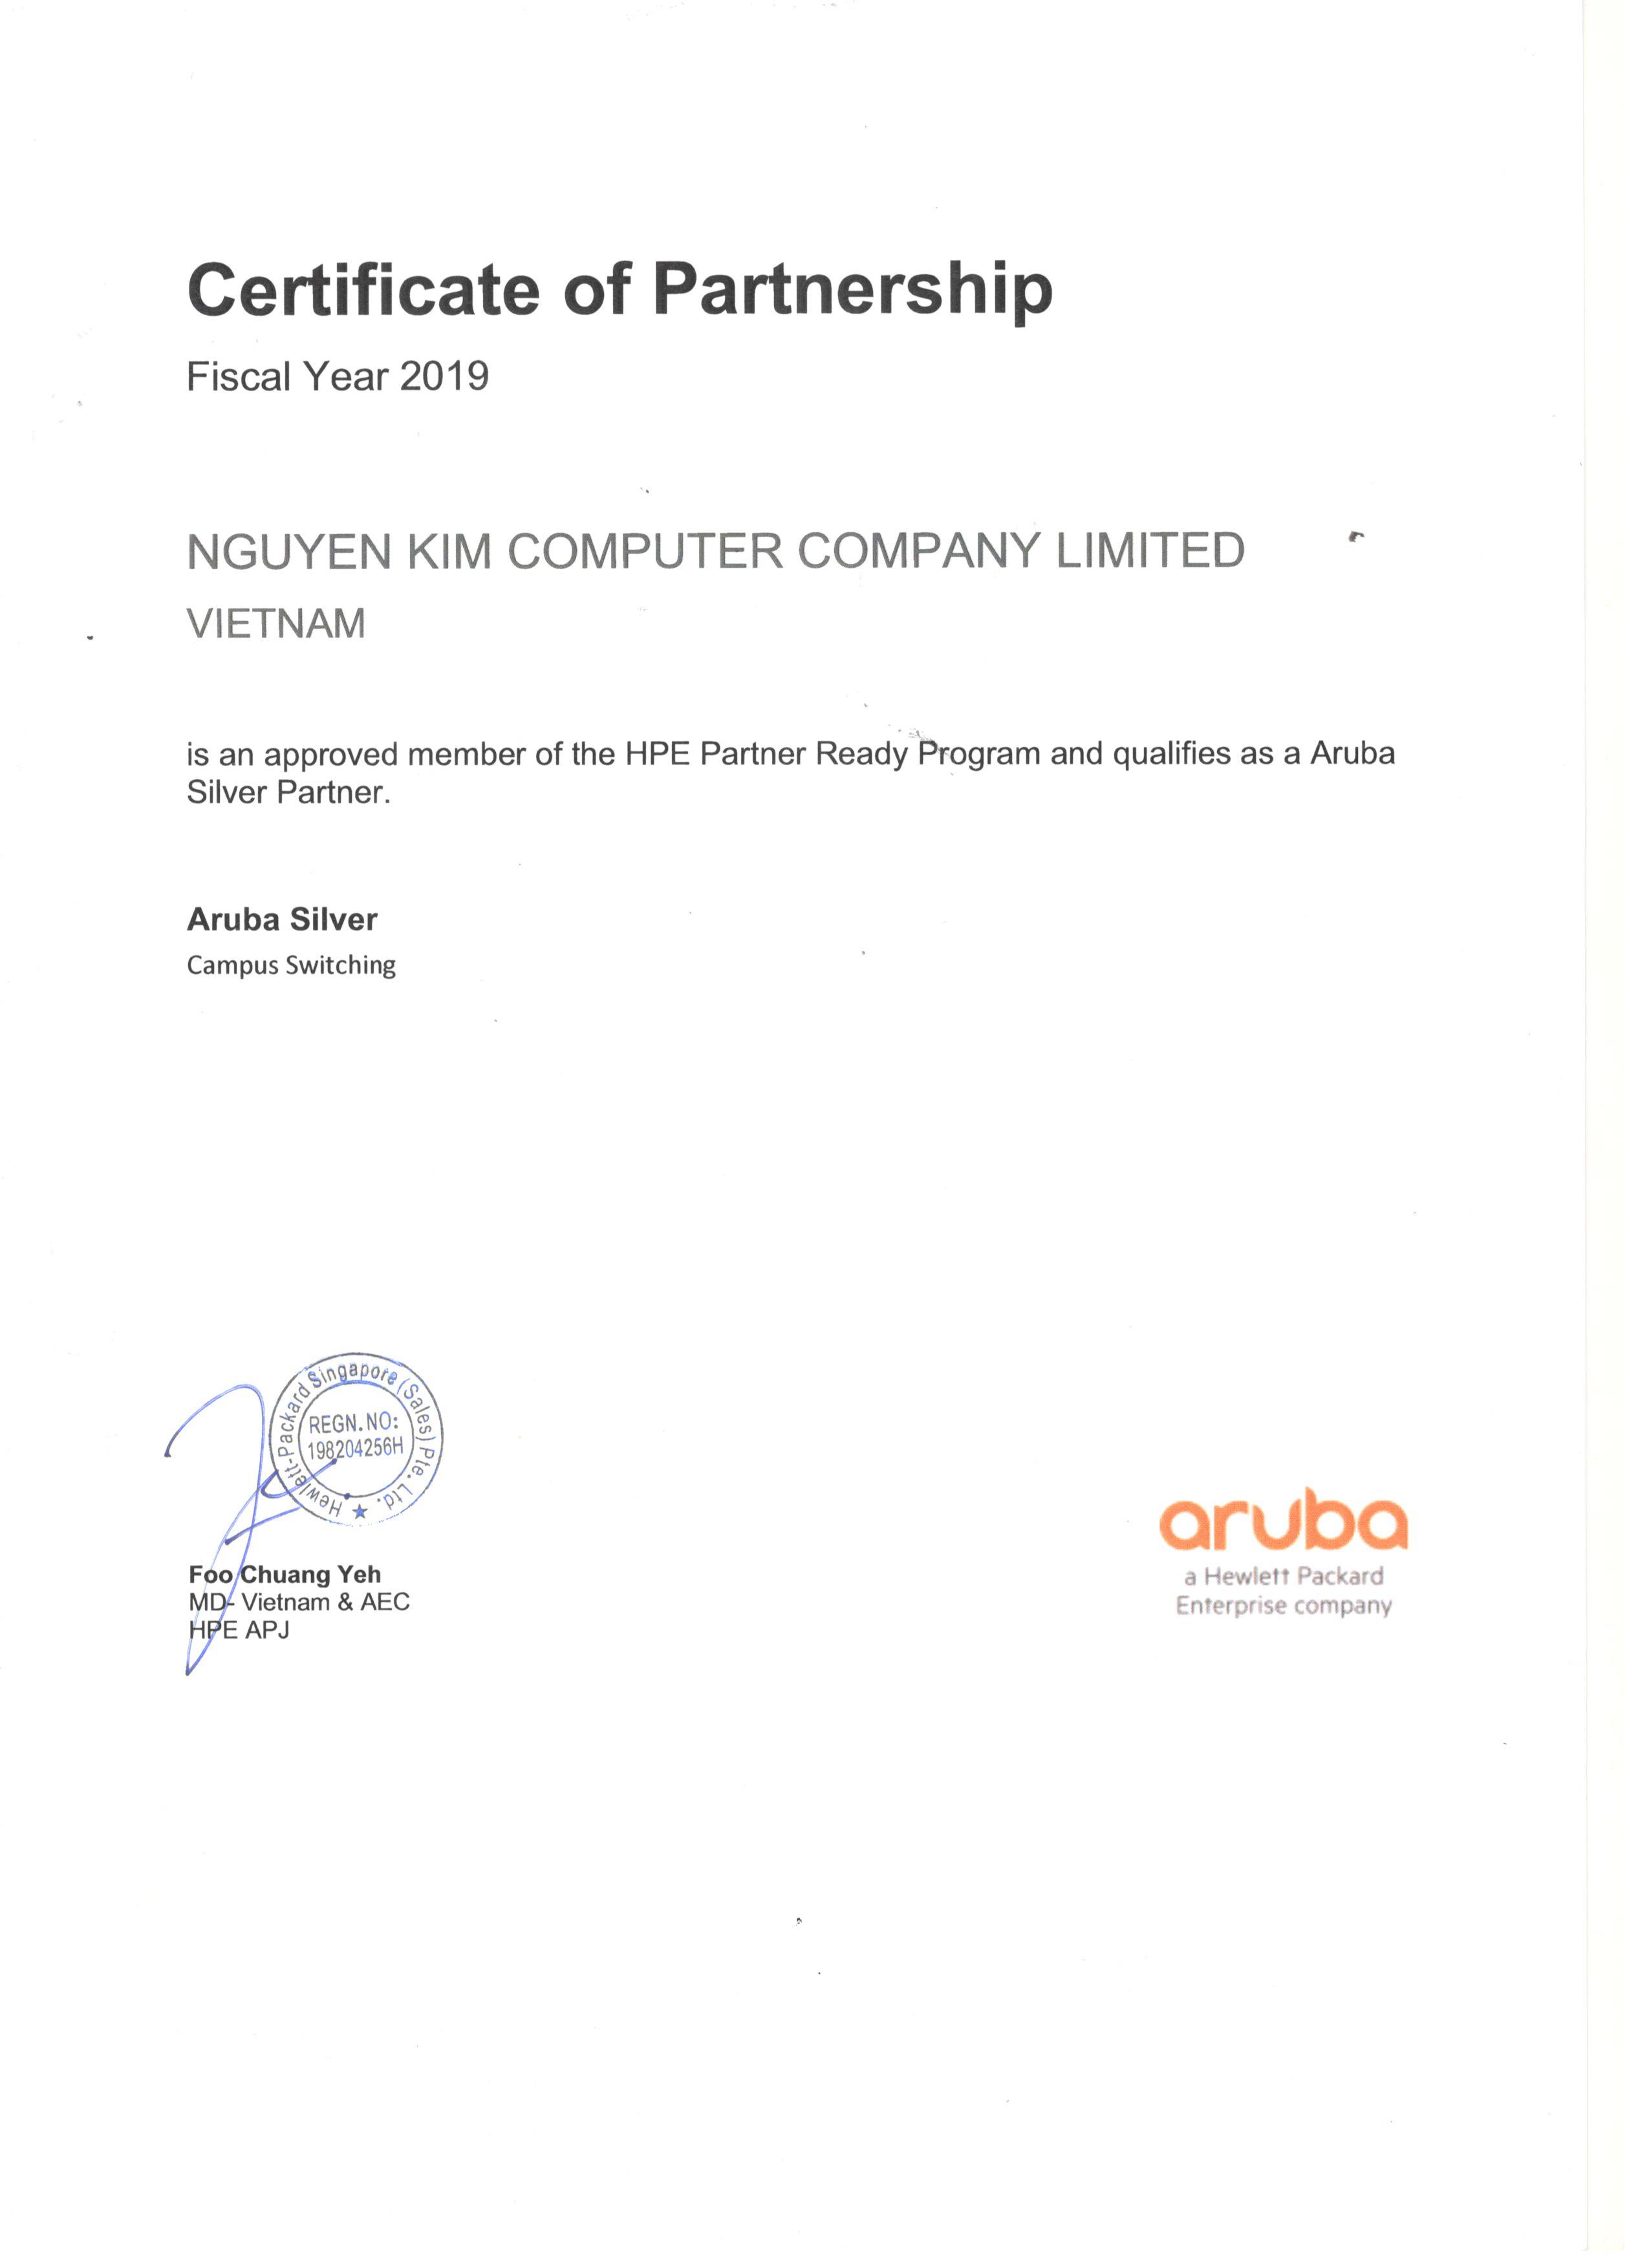 Chứng nhận HPE certificate of partnership-fiscal year 2019-Aruba silver partner